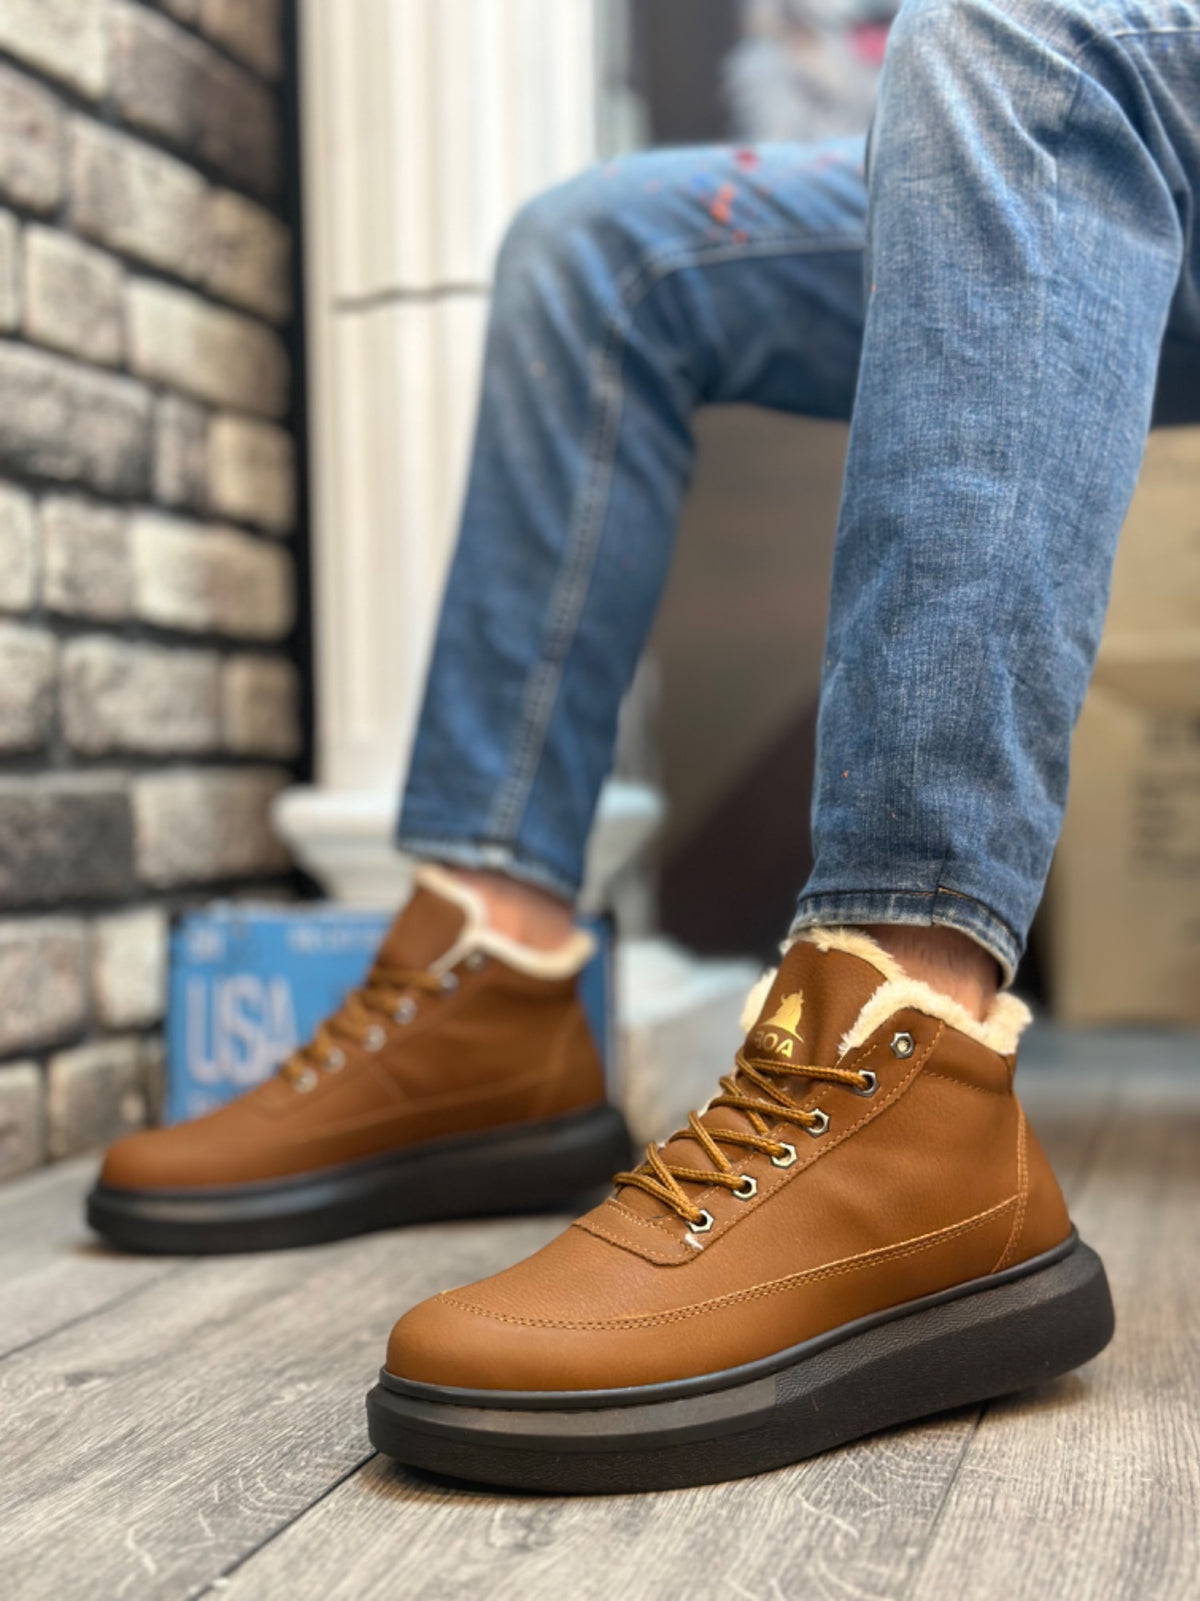 BA0151 Light Brown Men's Style Sports Boots with Fur Inside and Laces - STREETMODE ™